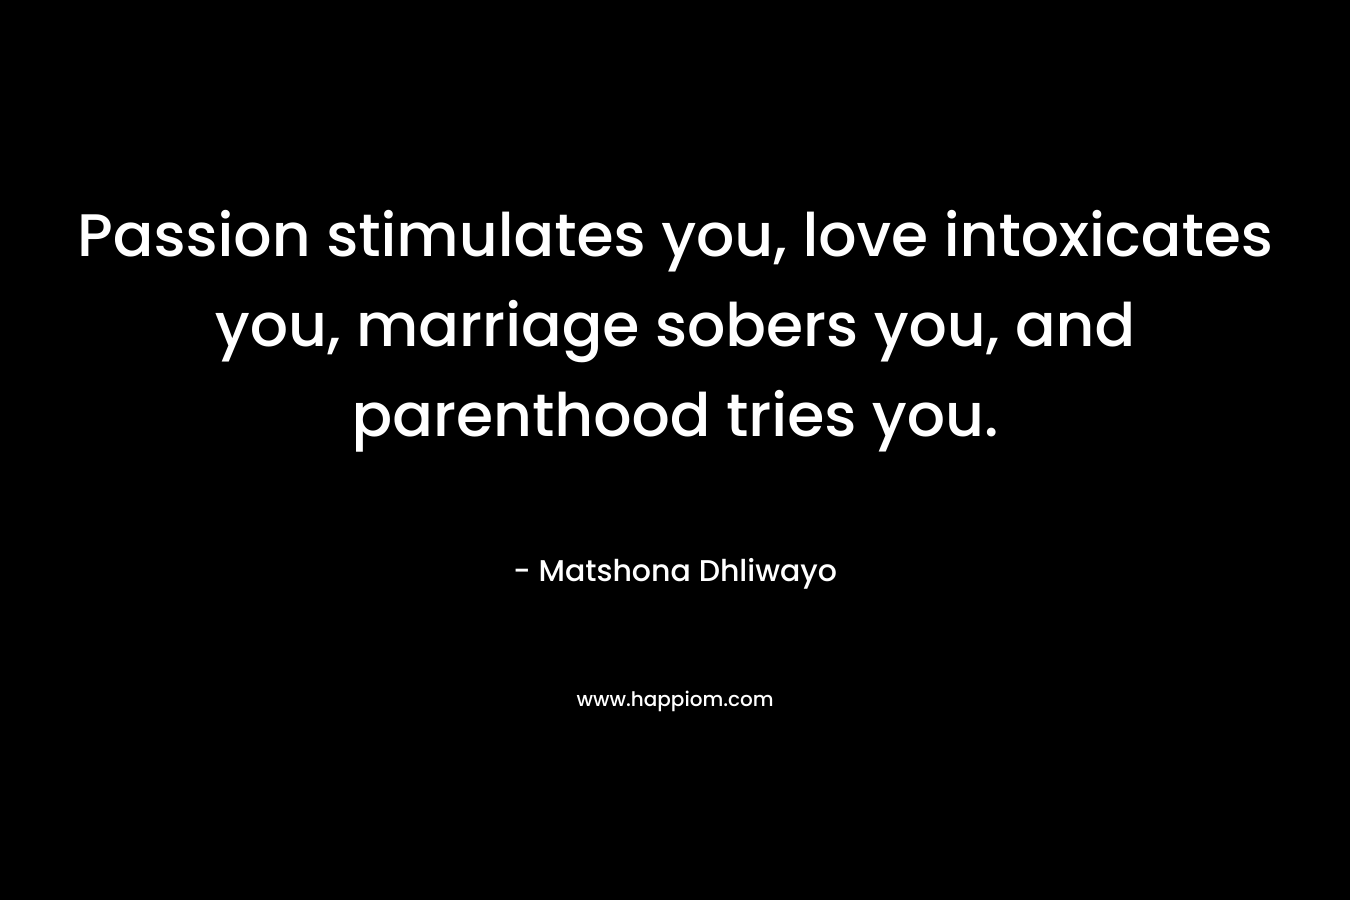 Passion stimulates you, love intoxicates you, marriage sobers you, and parenthood tries you. – Matshona Dhliwayo